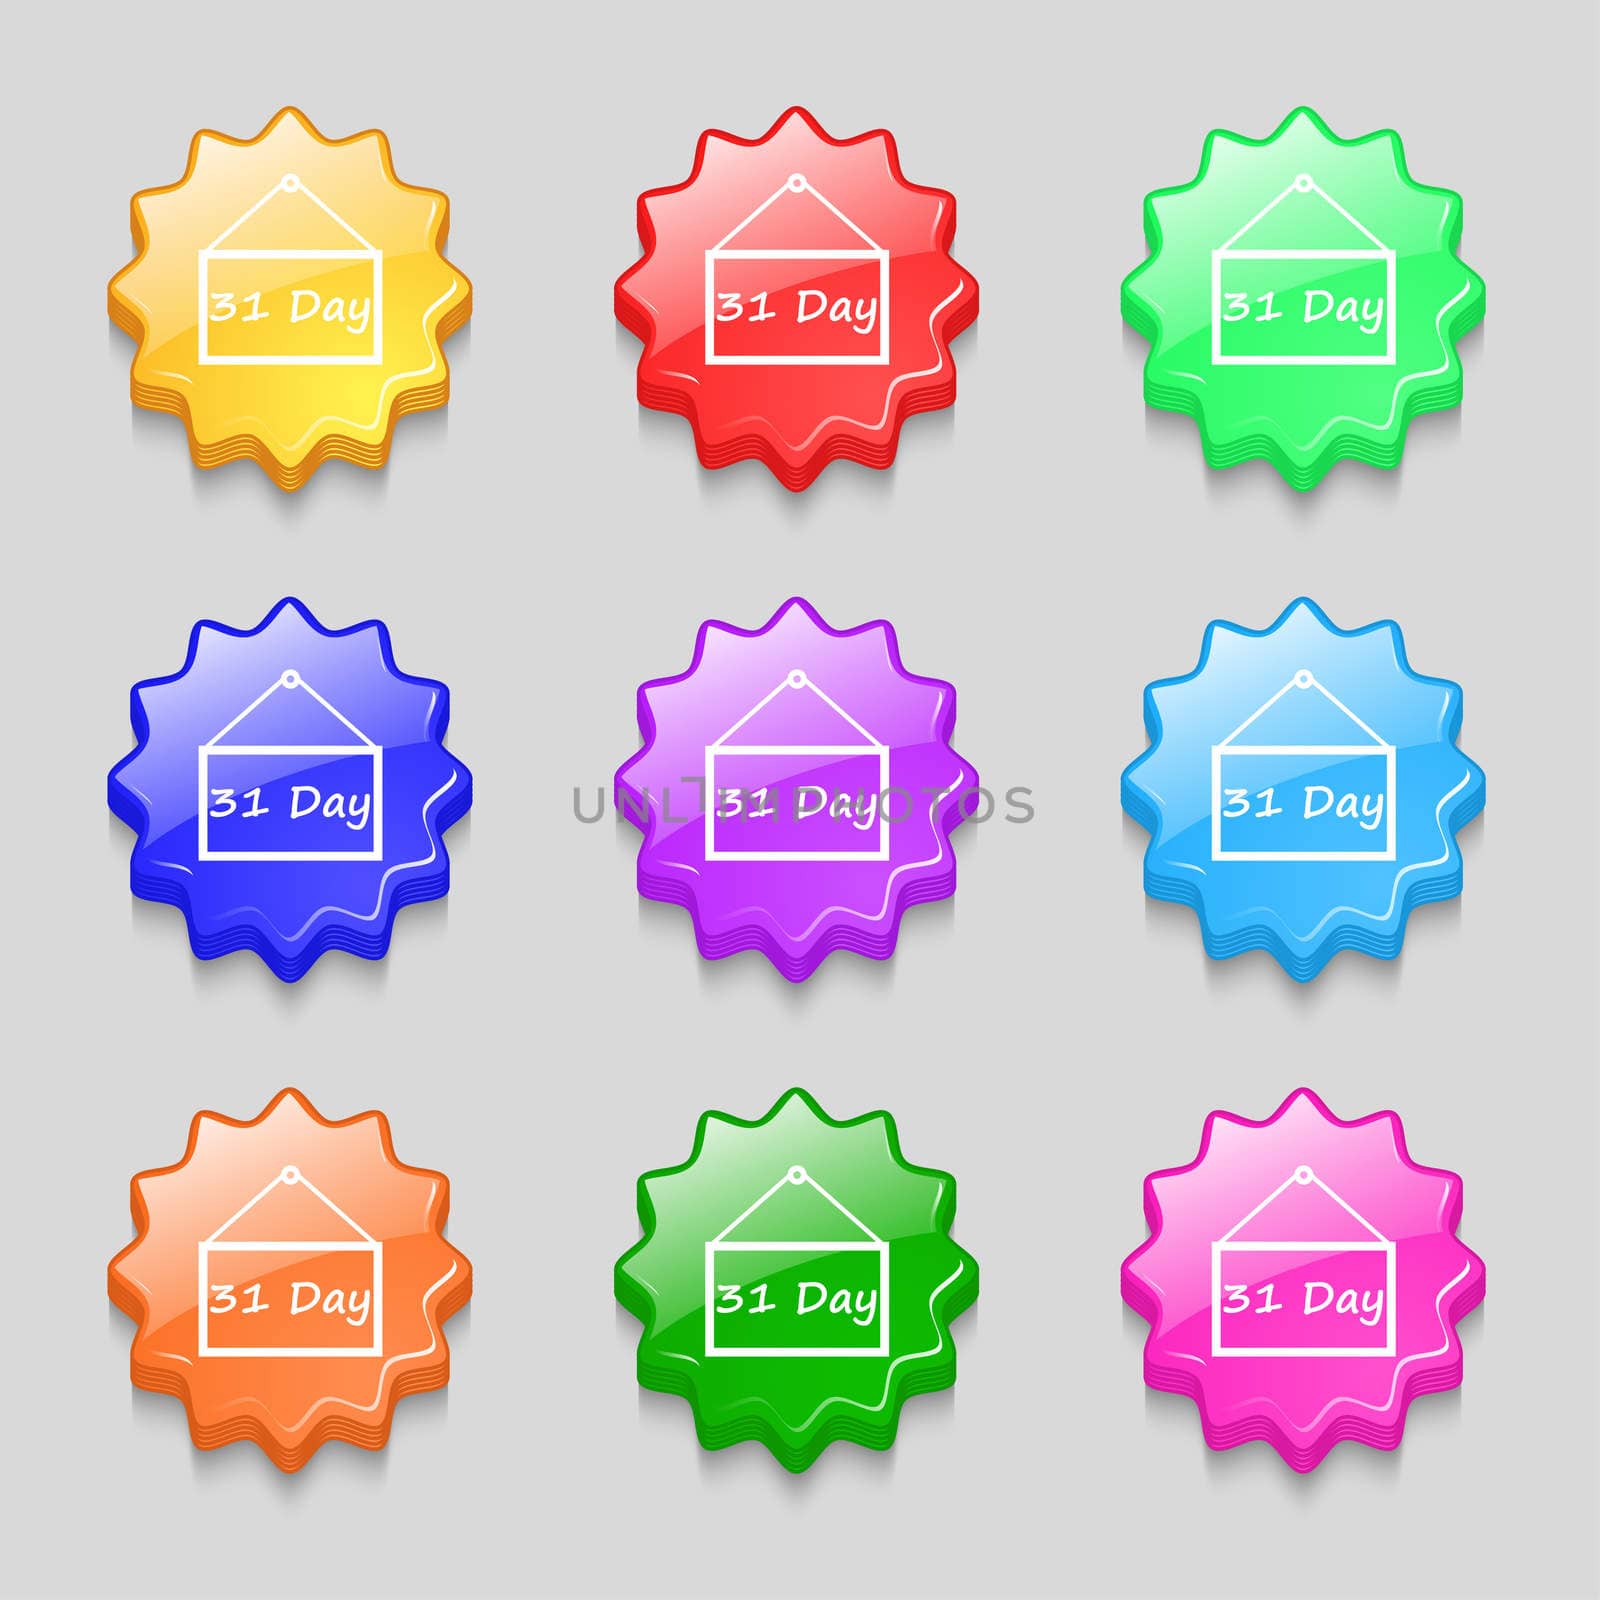 Calendar day, 31 days icon sign. symbol on nine wavy colourful buttons. illustration